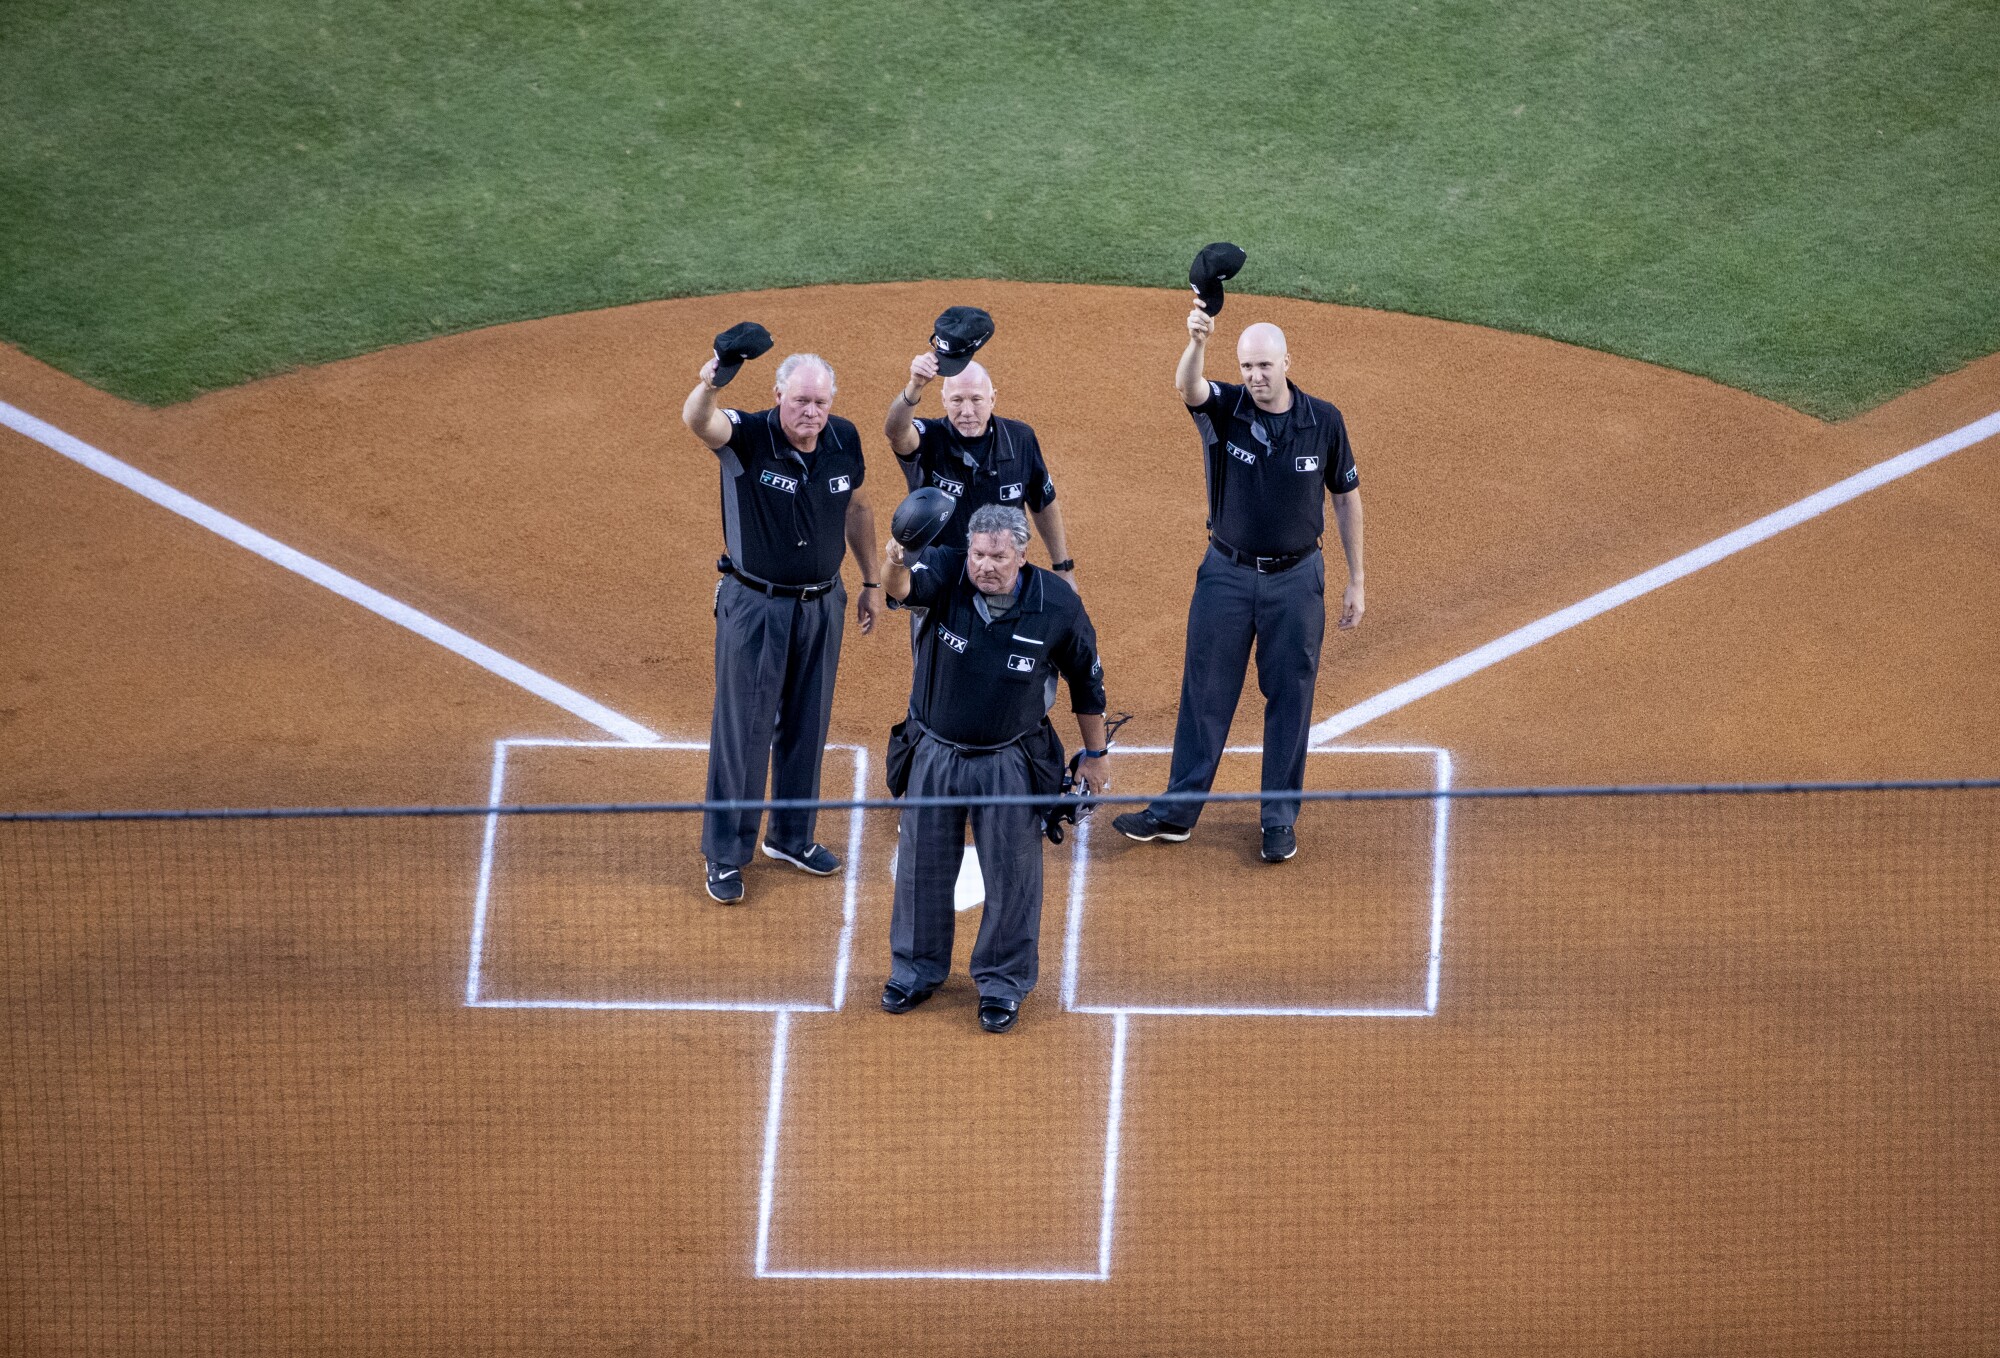 The referees of the game raise baseball caps in front of the press box in honor of Vin Scully. 